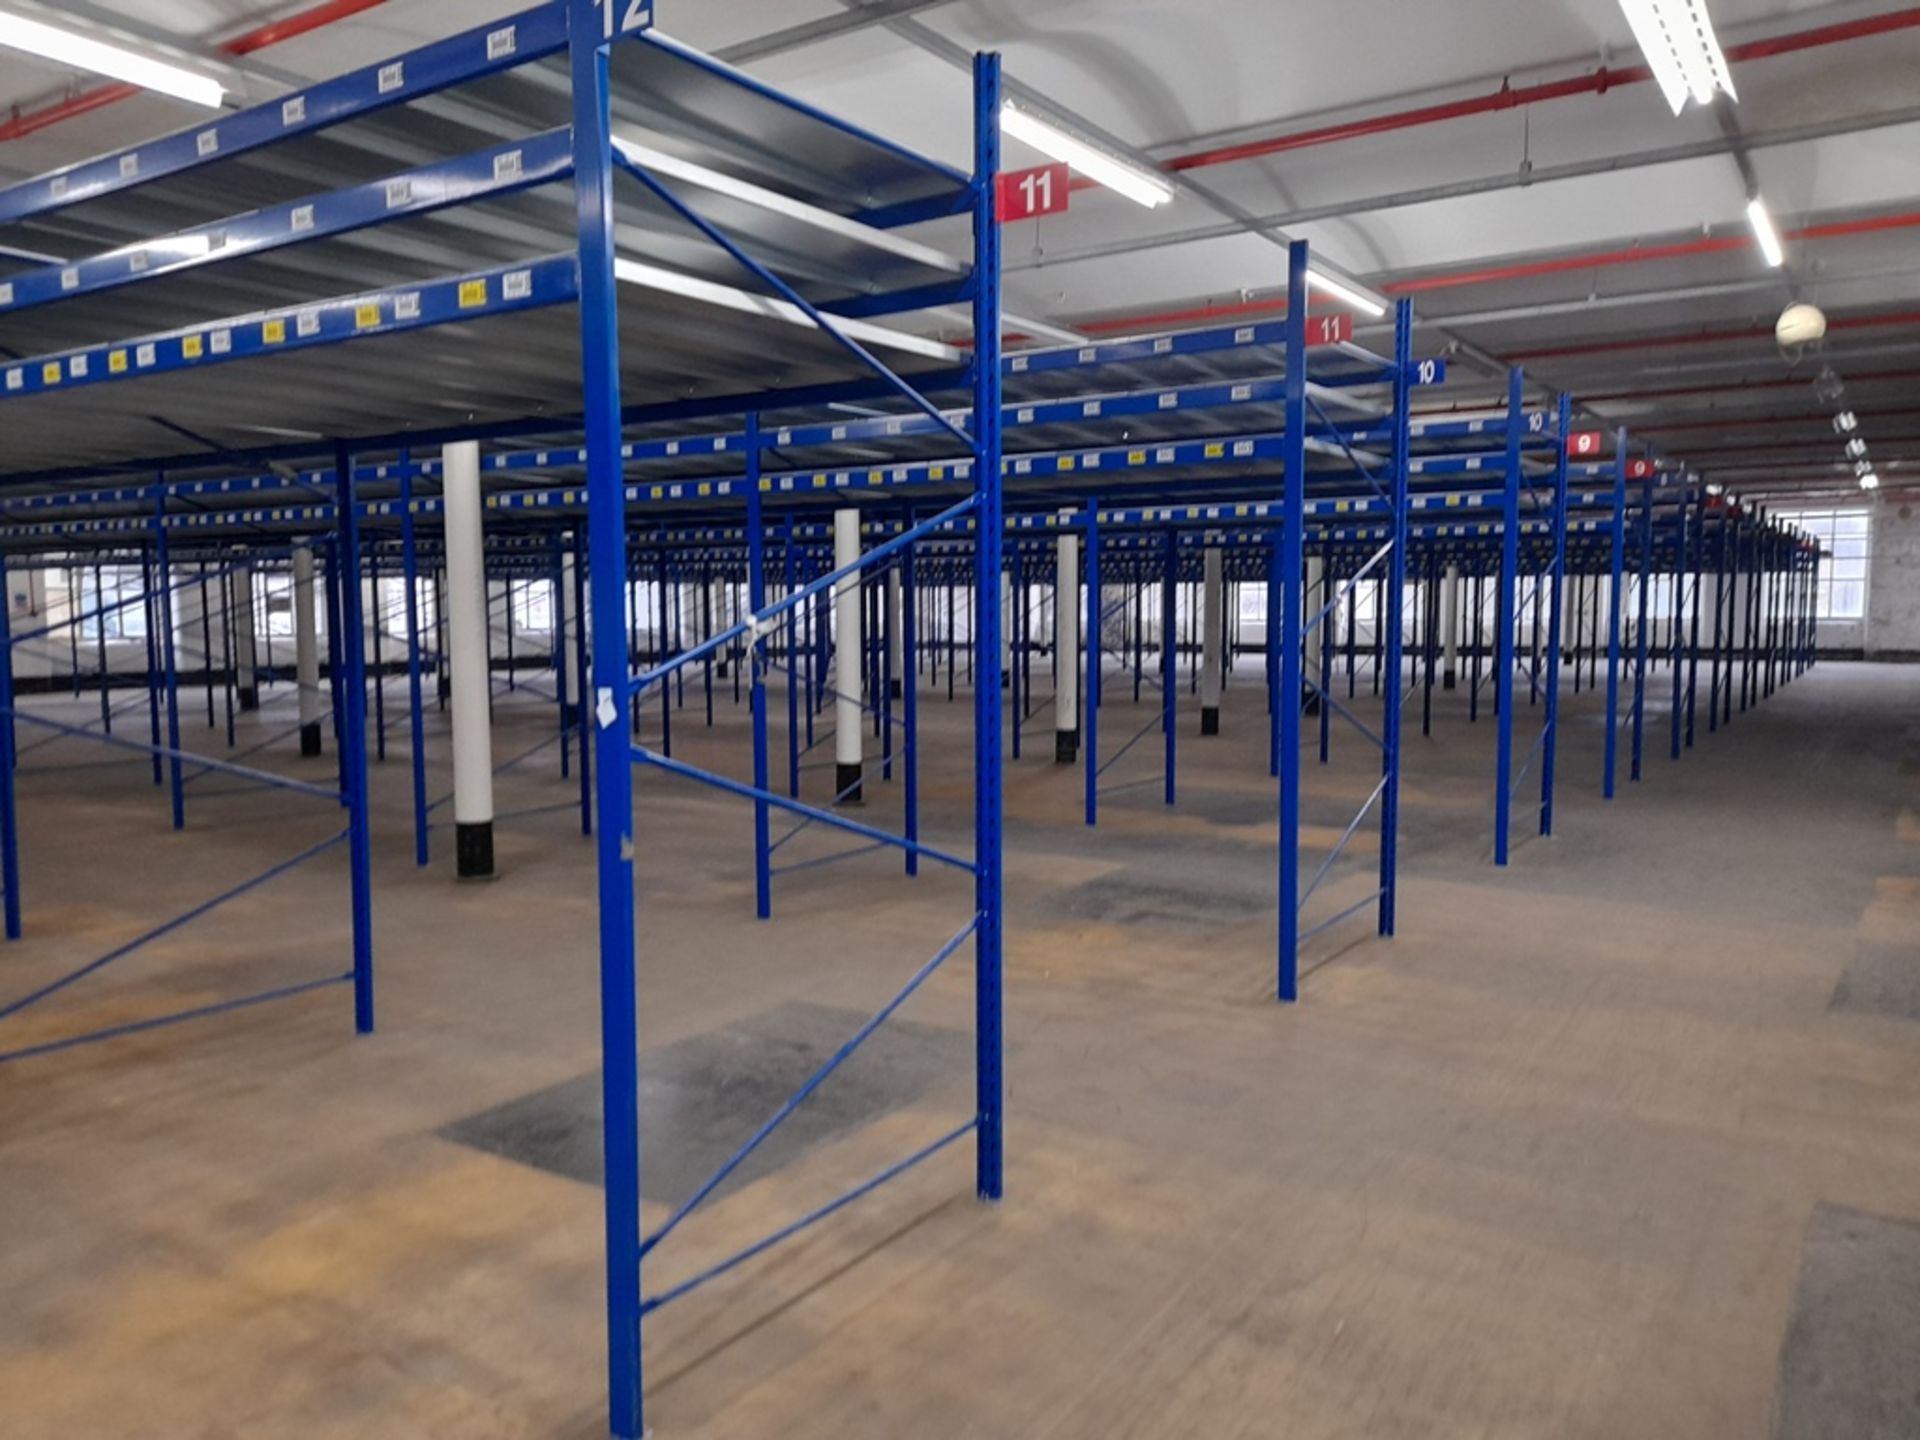 Static pallet racking - 193 bays, each with 3 pairs of beams and 24 metal shelf partitions(Beam - Image 9 of 13